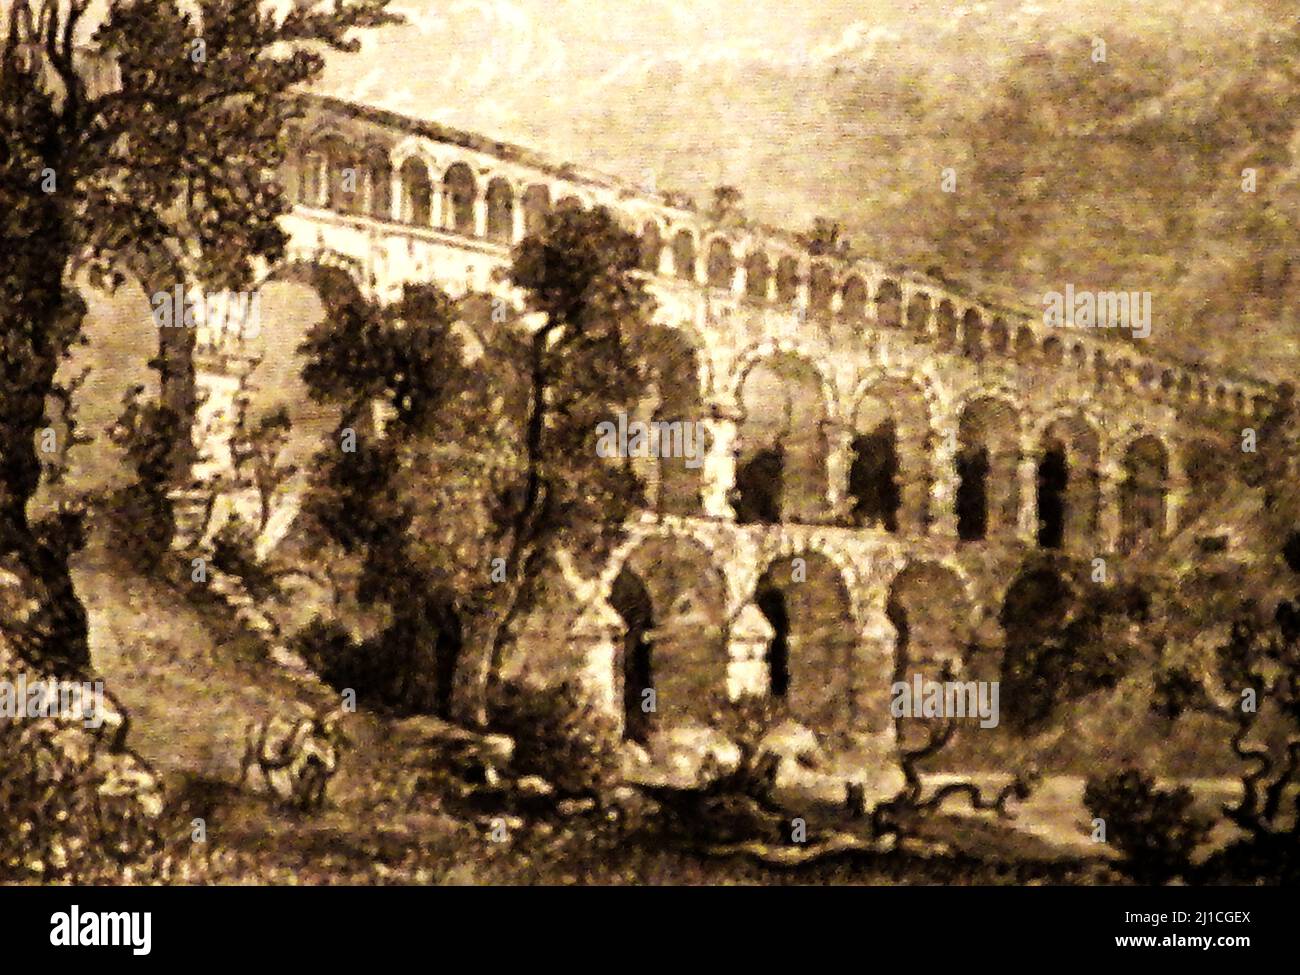 A 19th century artist's impression of the Pont du Gard Aqueduct as it was at that time. This ancient Roman 48.8 m (160 ft) aqueduct was built in the first century AD to carry water over the 50 km (31 mi) countryside to the Roman colony of Nemausus (Nimes). The bridge  spans the river Gardon Stock Photo